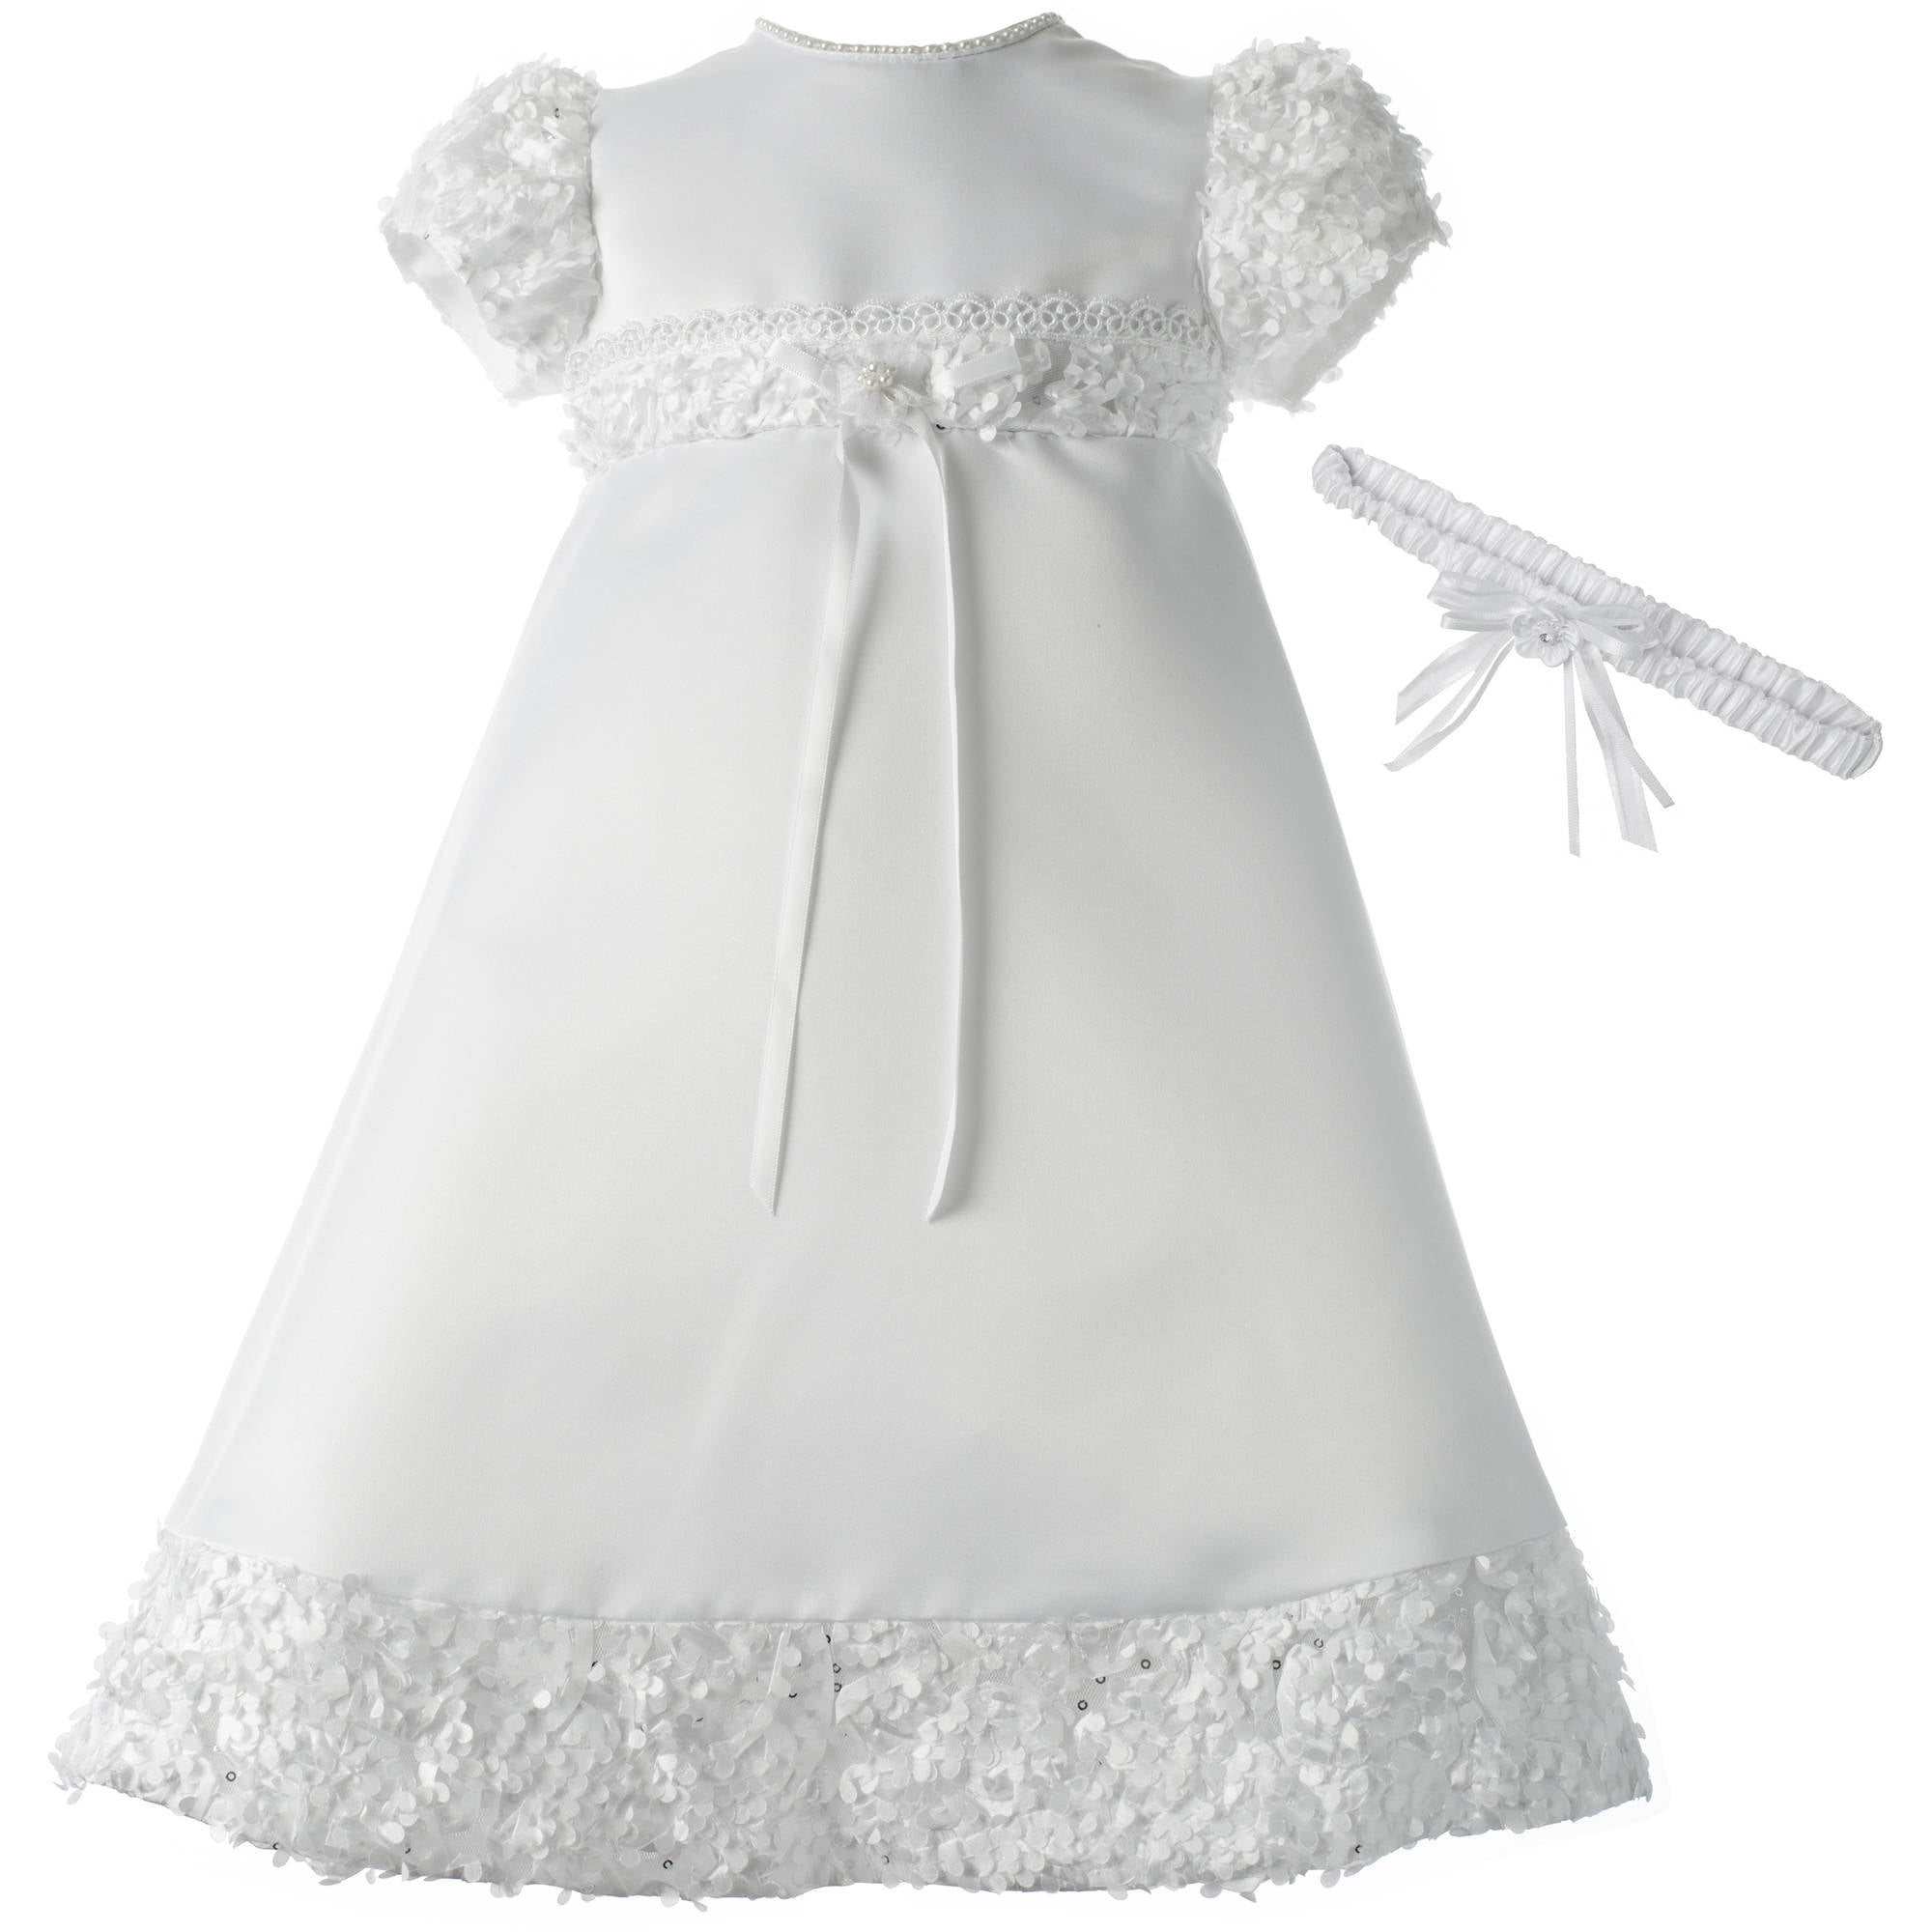 Michealboy Ivory White Christening Daily Casual Dress Summer Pageant 